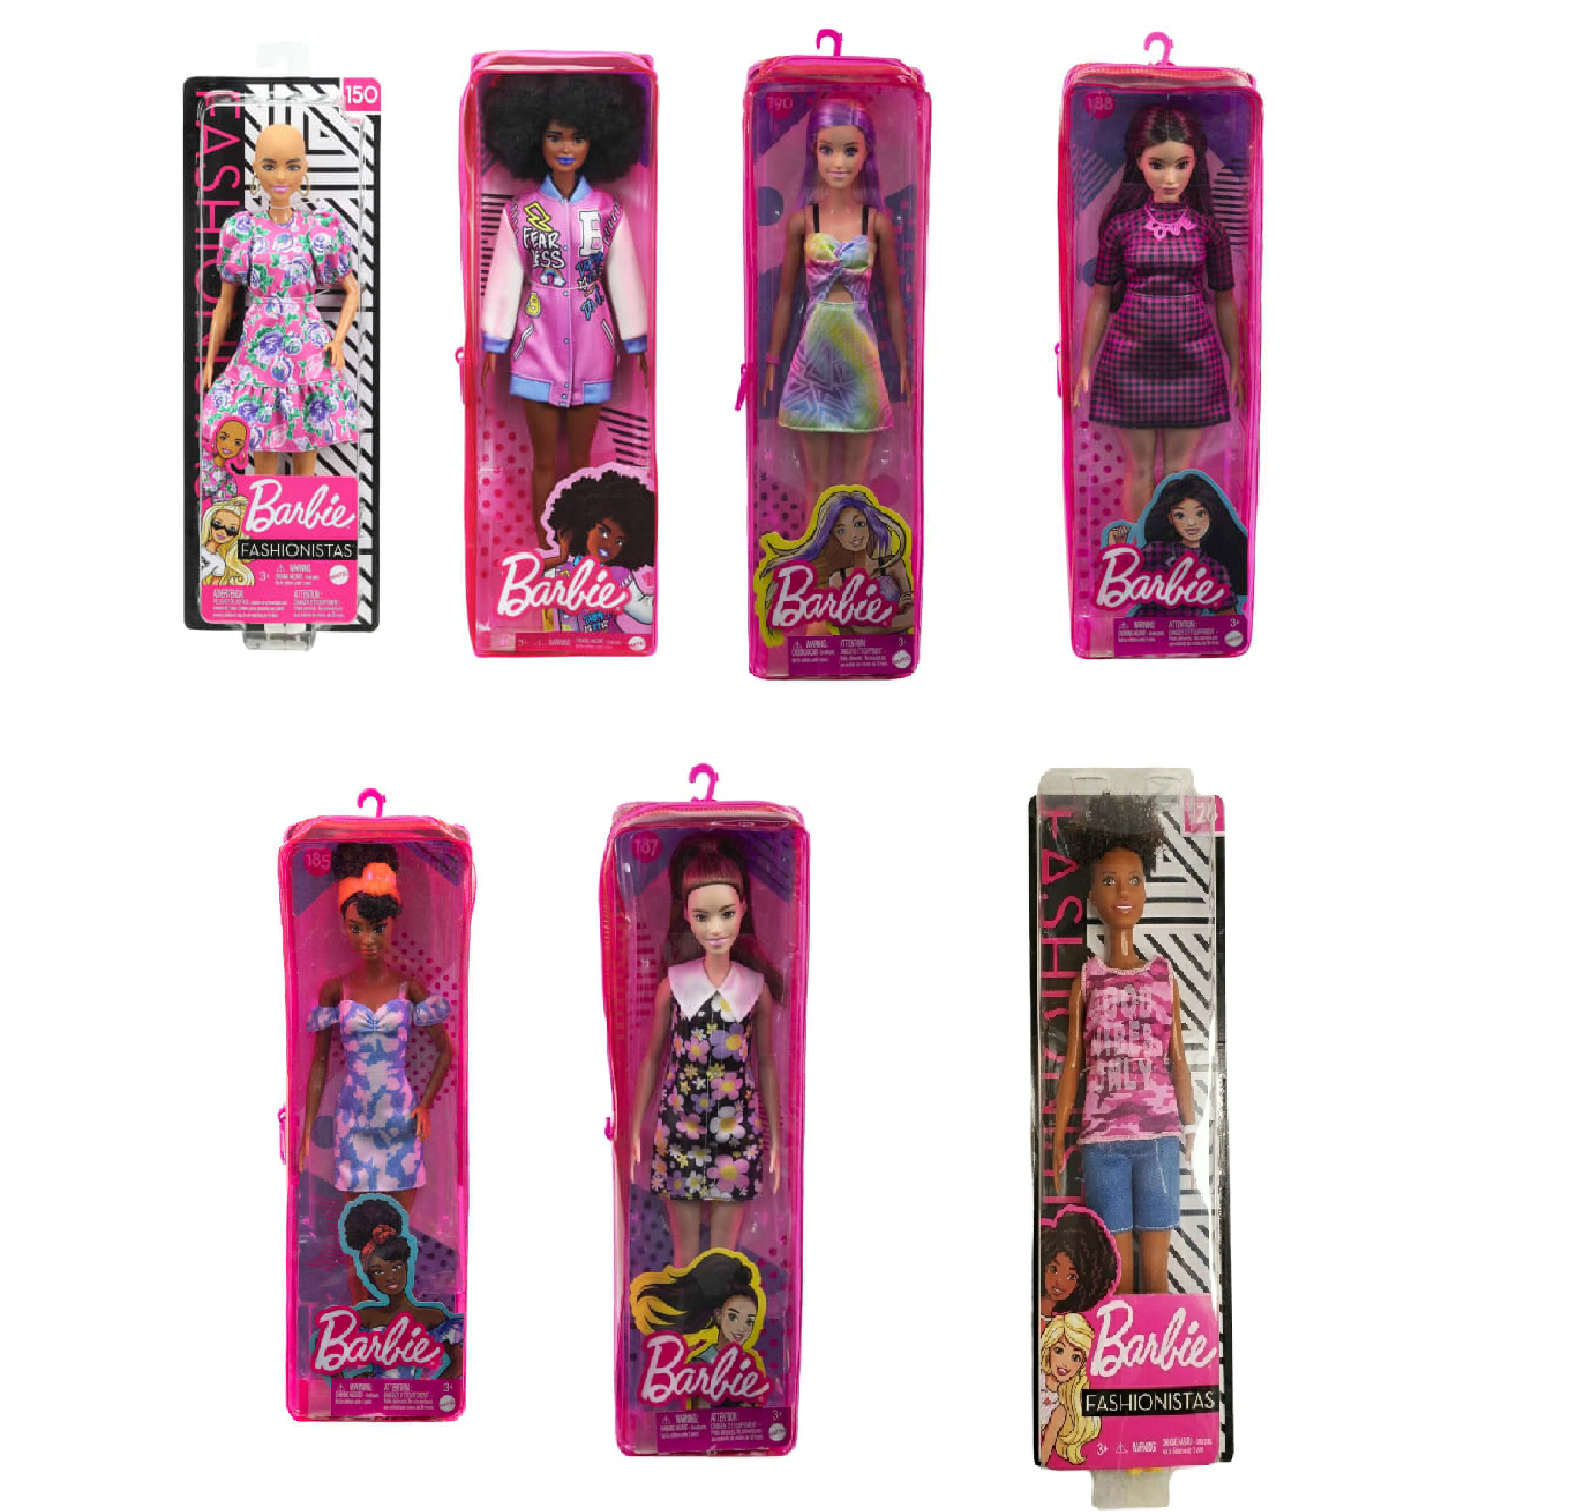 https://www.awesometoys.com/wp-content/uploads/2020/06/barbies-together.png